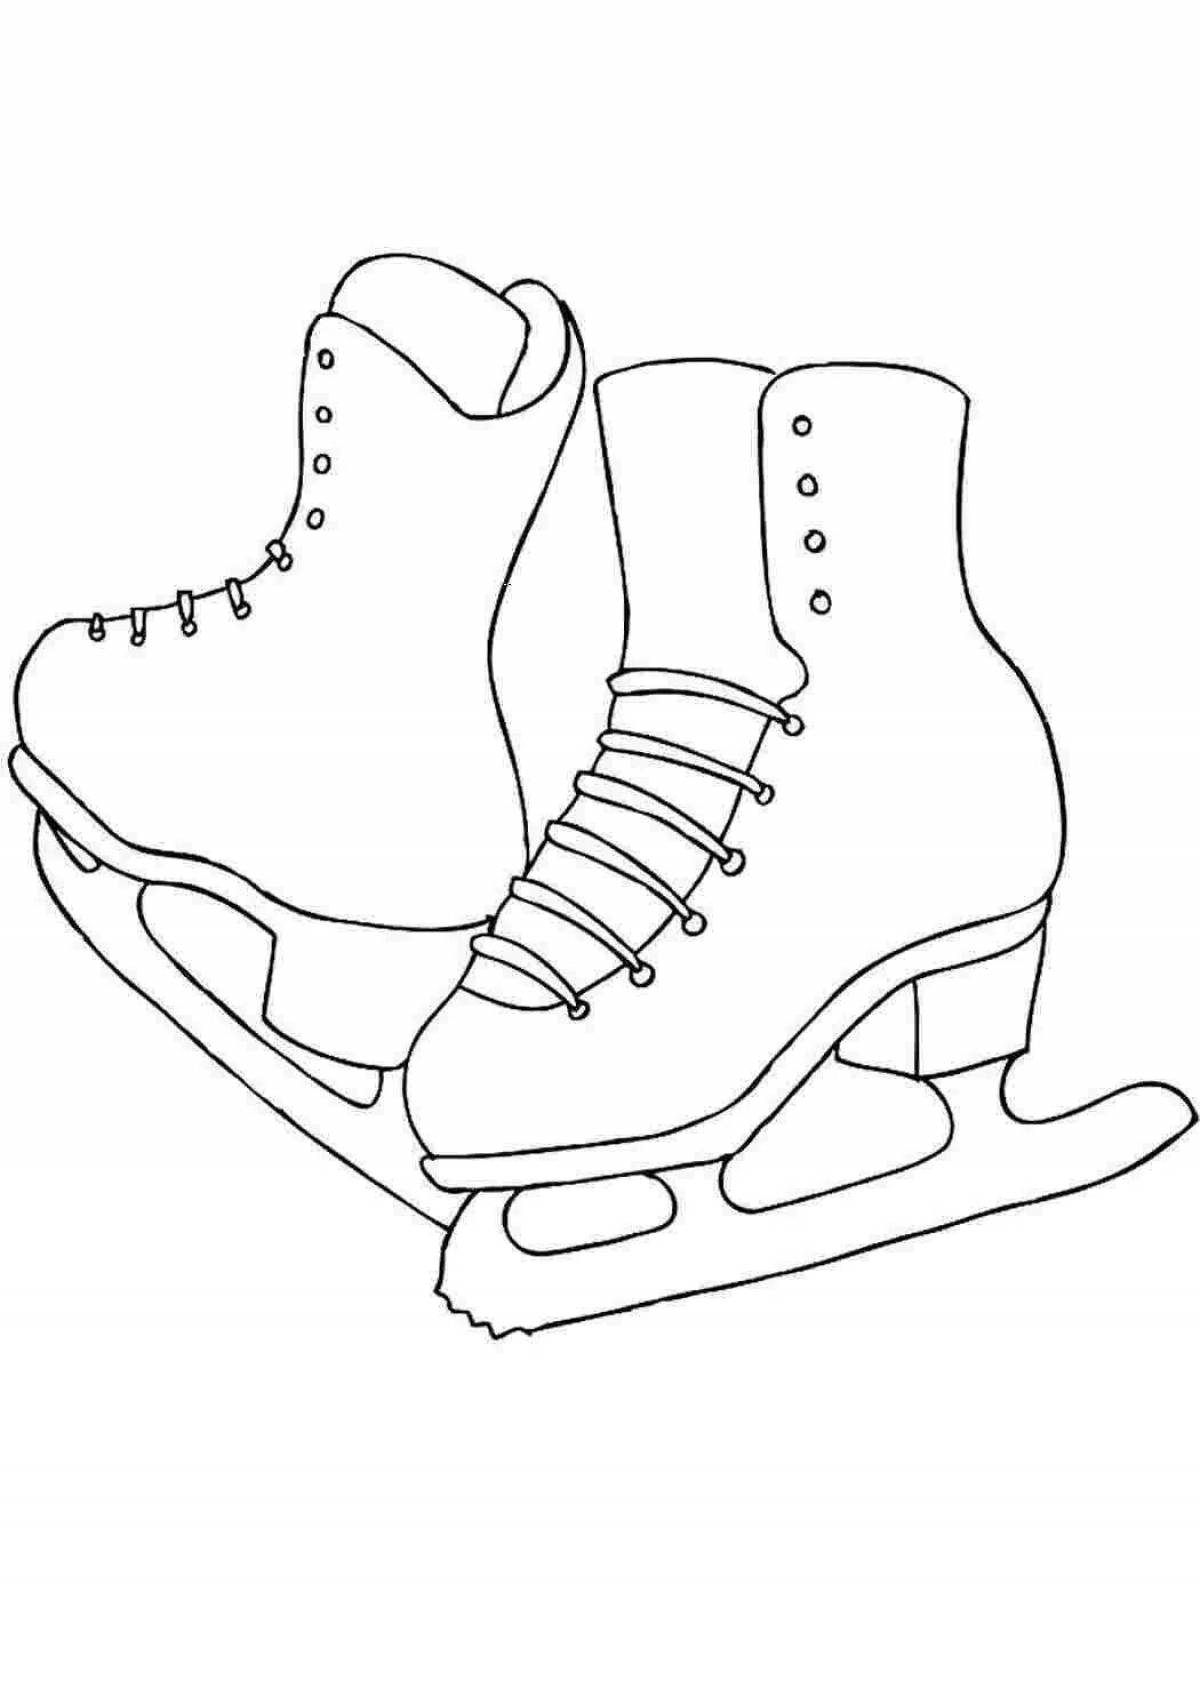 Coloring bright skates for children 5-6 years old